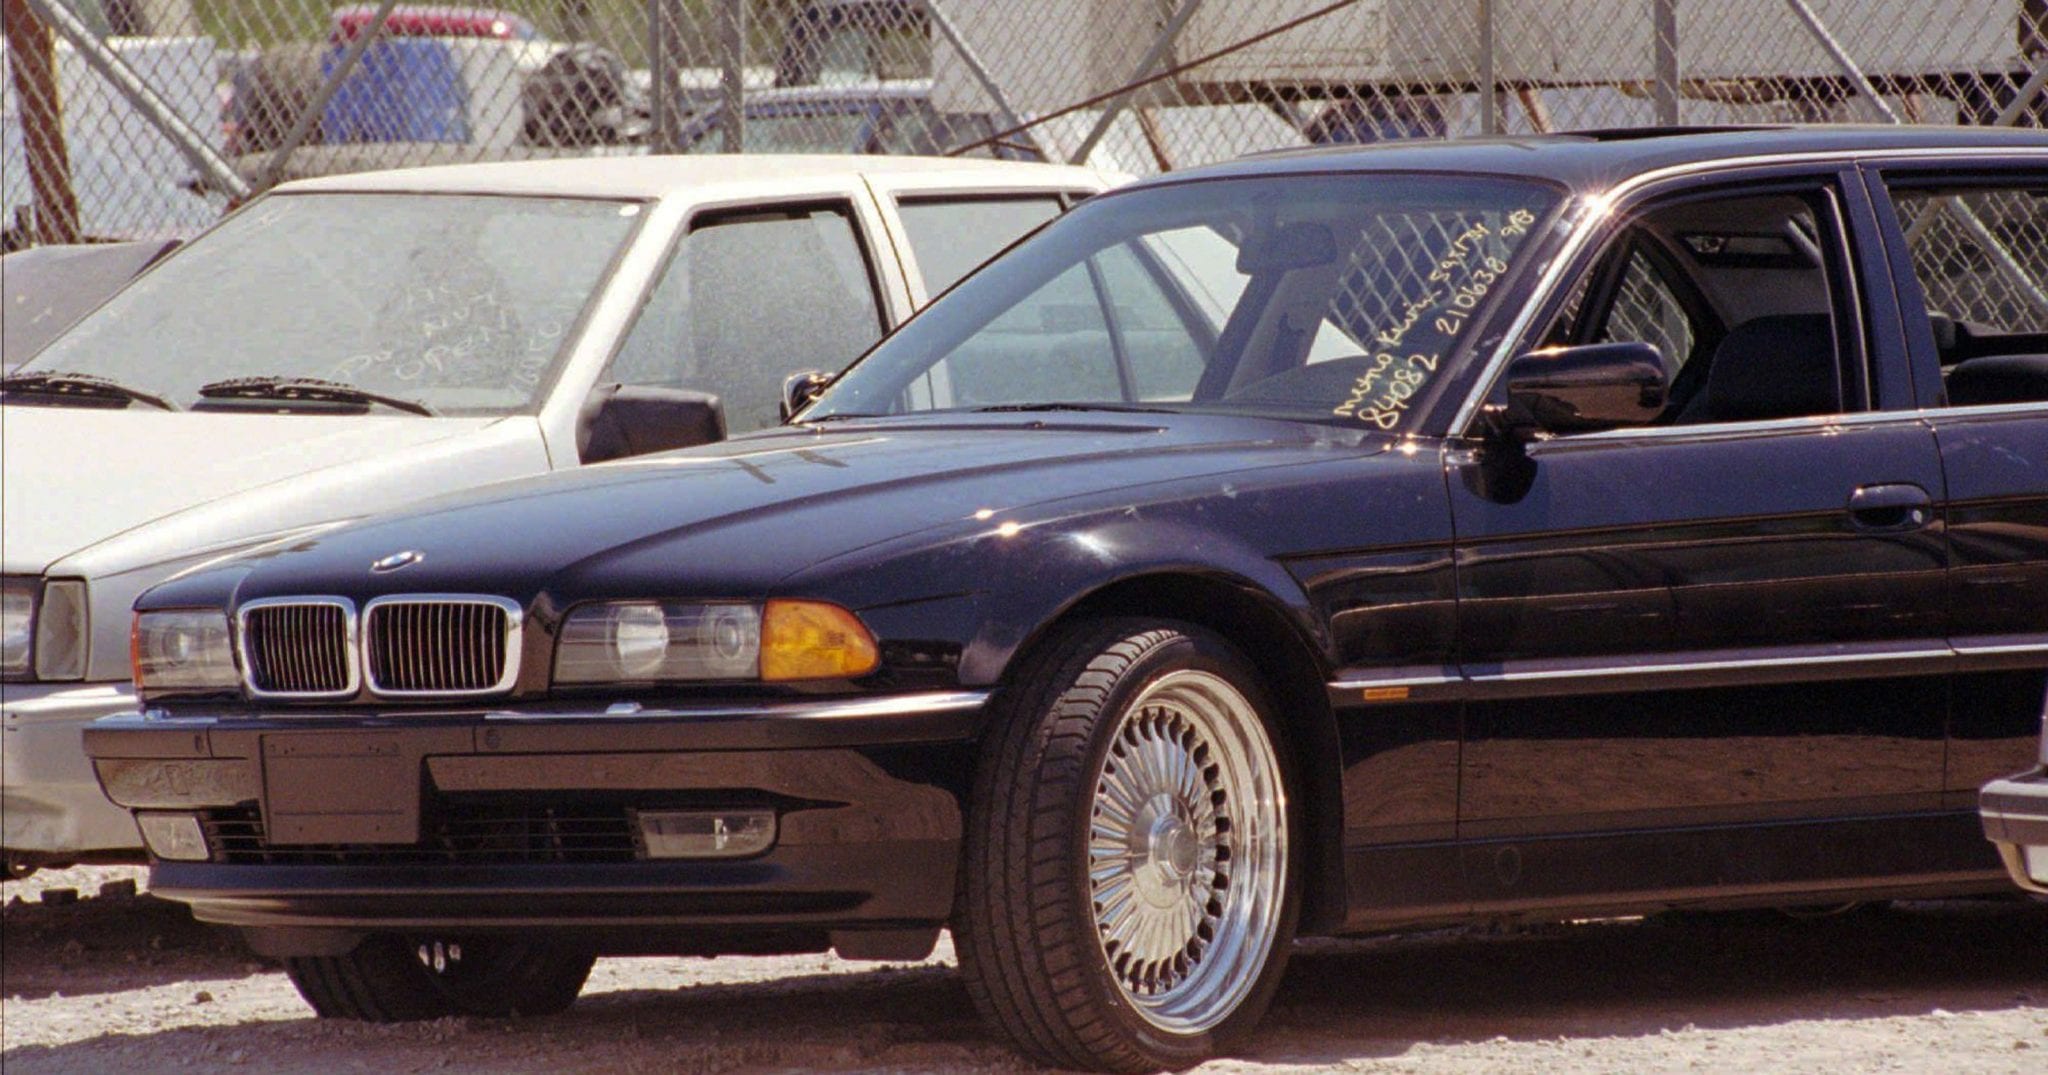 BMW Tupac Shakur Was Shot In Is Selling For $1.5M|Throwback